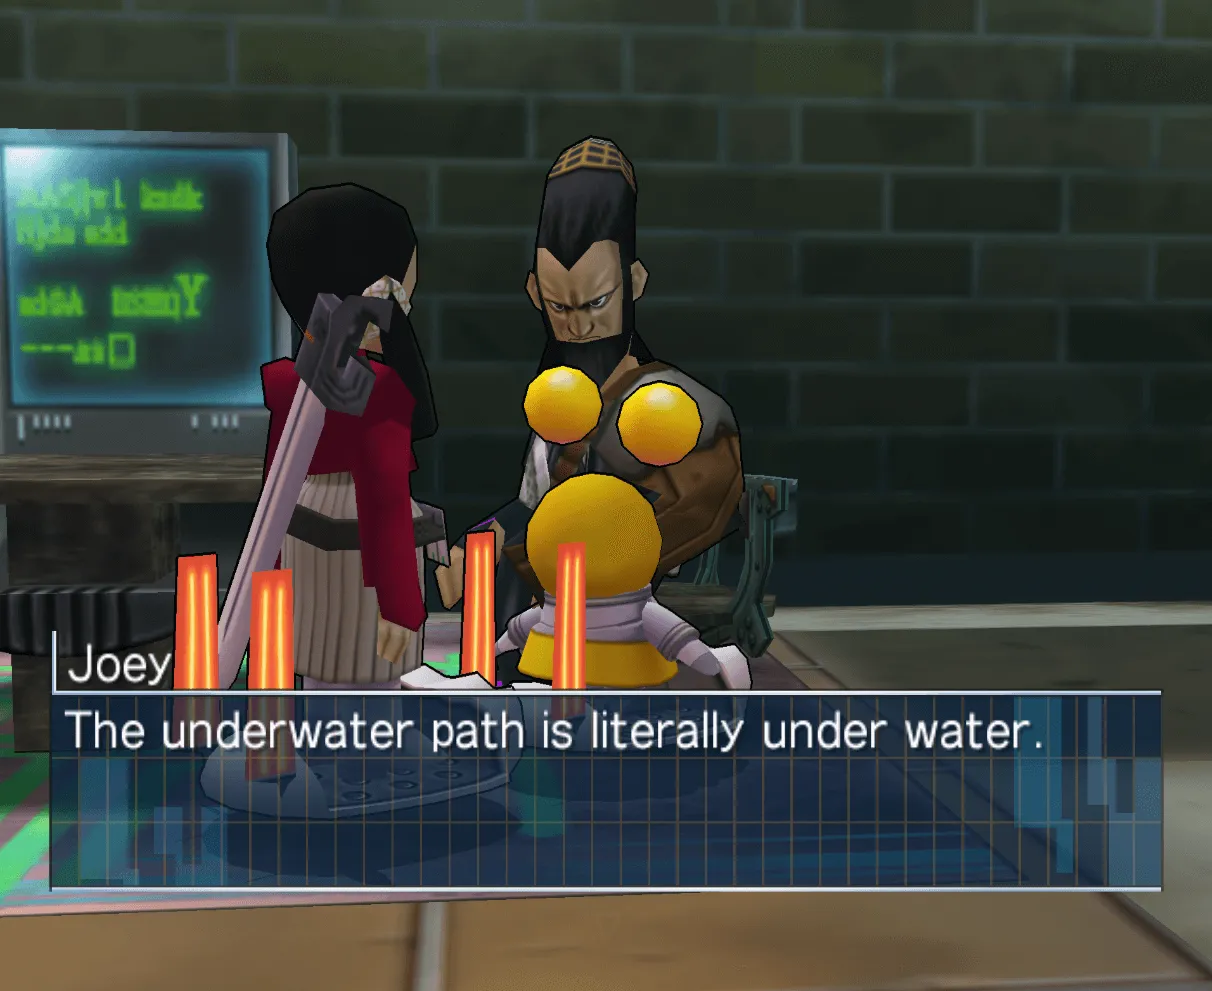 Poleena and Chaika talking to Joey. The dialogue reads: The underwater path is literally under water.